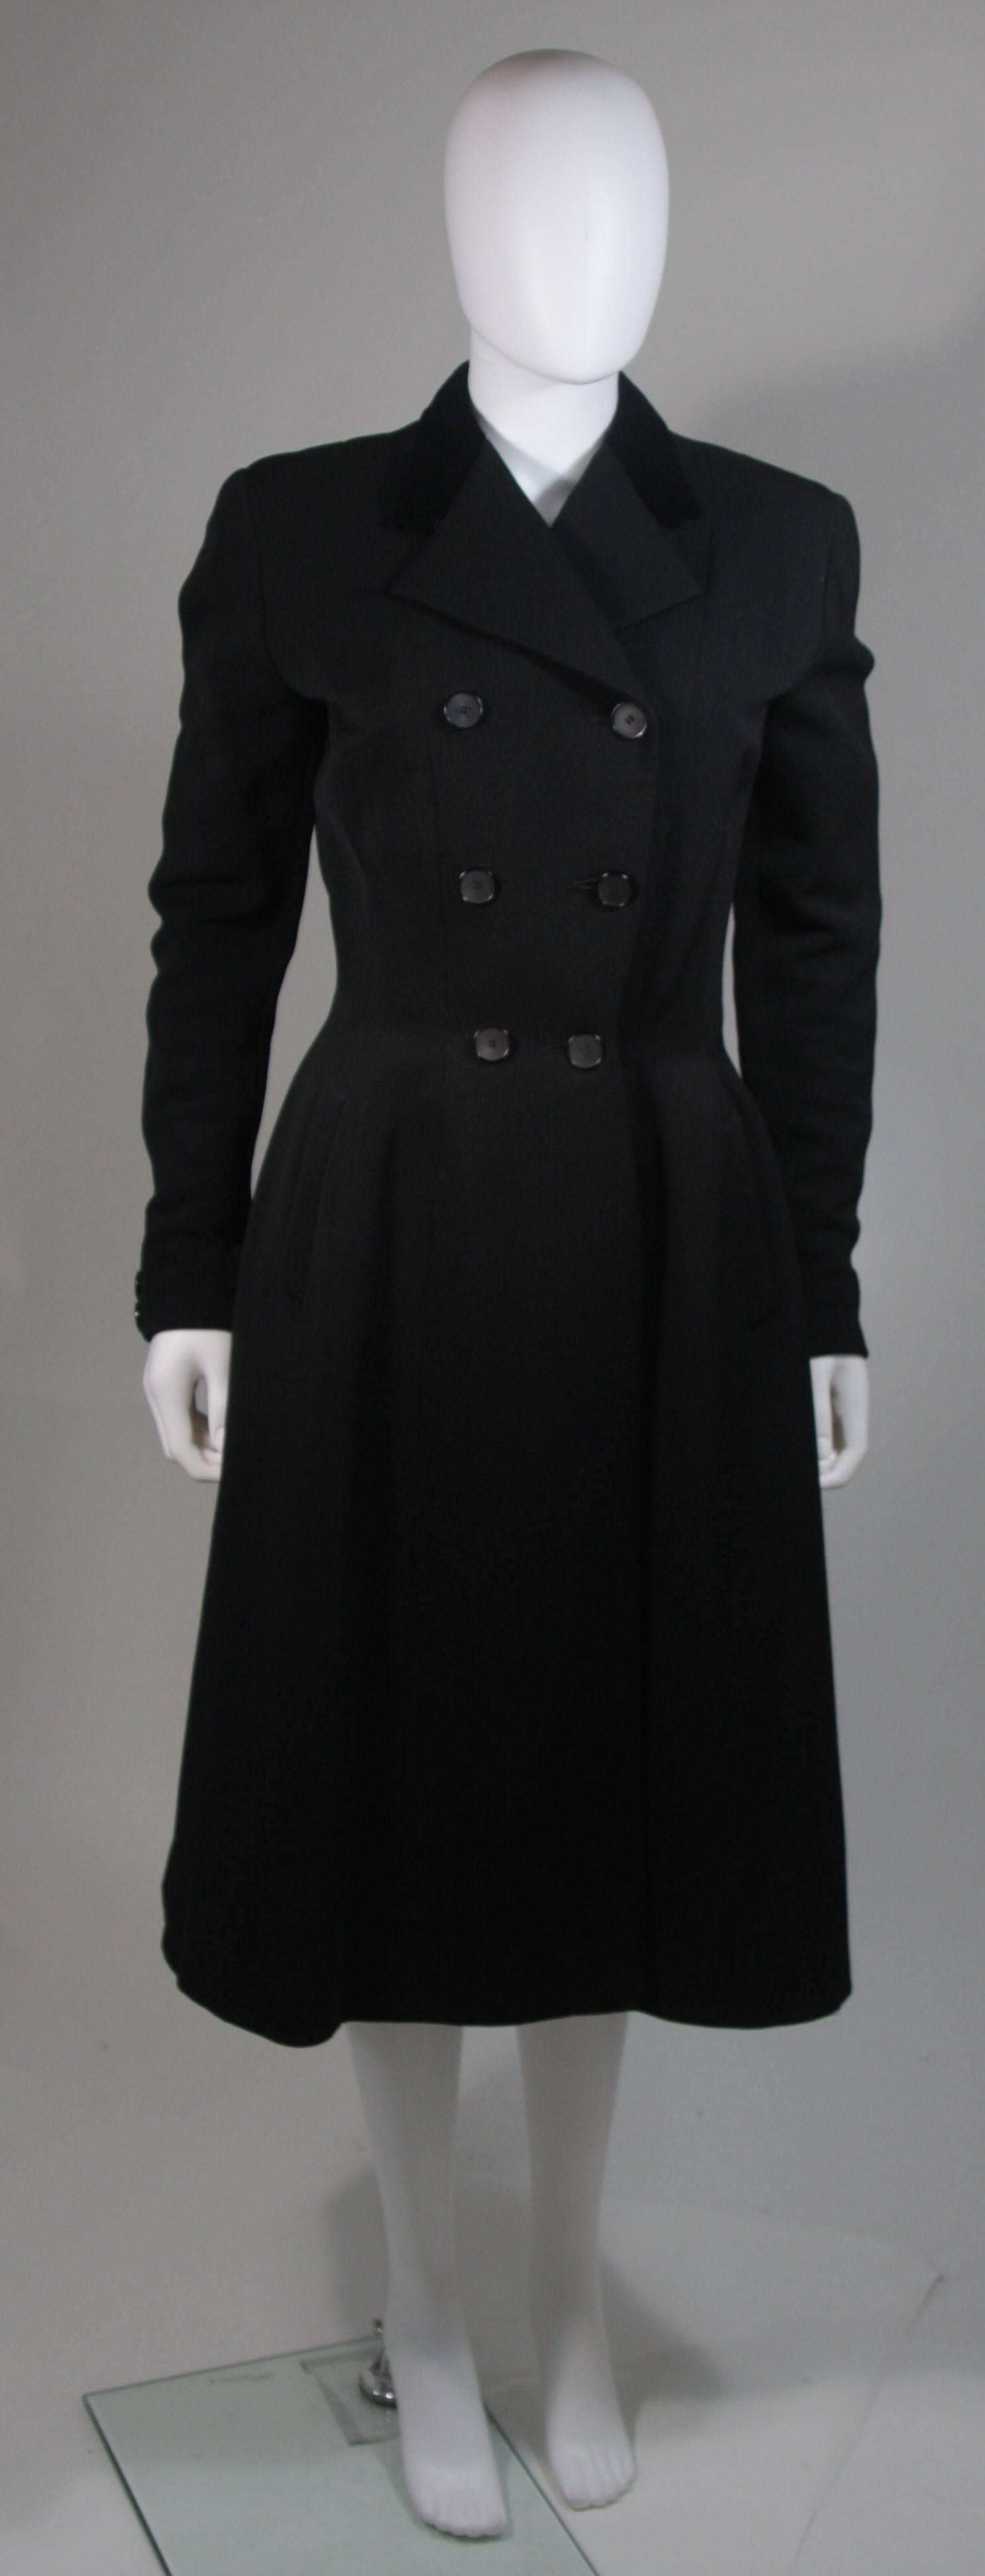 This coat is a rare piece representing the 'NEW LOOK' that originated in Paris by The House of Dior in  1947 shortly after WWII.
The 'NEW LOOK'  or 'Wasp Waist' was followed shortly thereafter  by all important fashion houses in Europe and the USA.